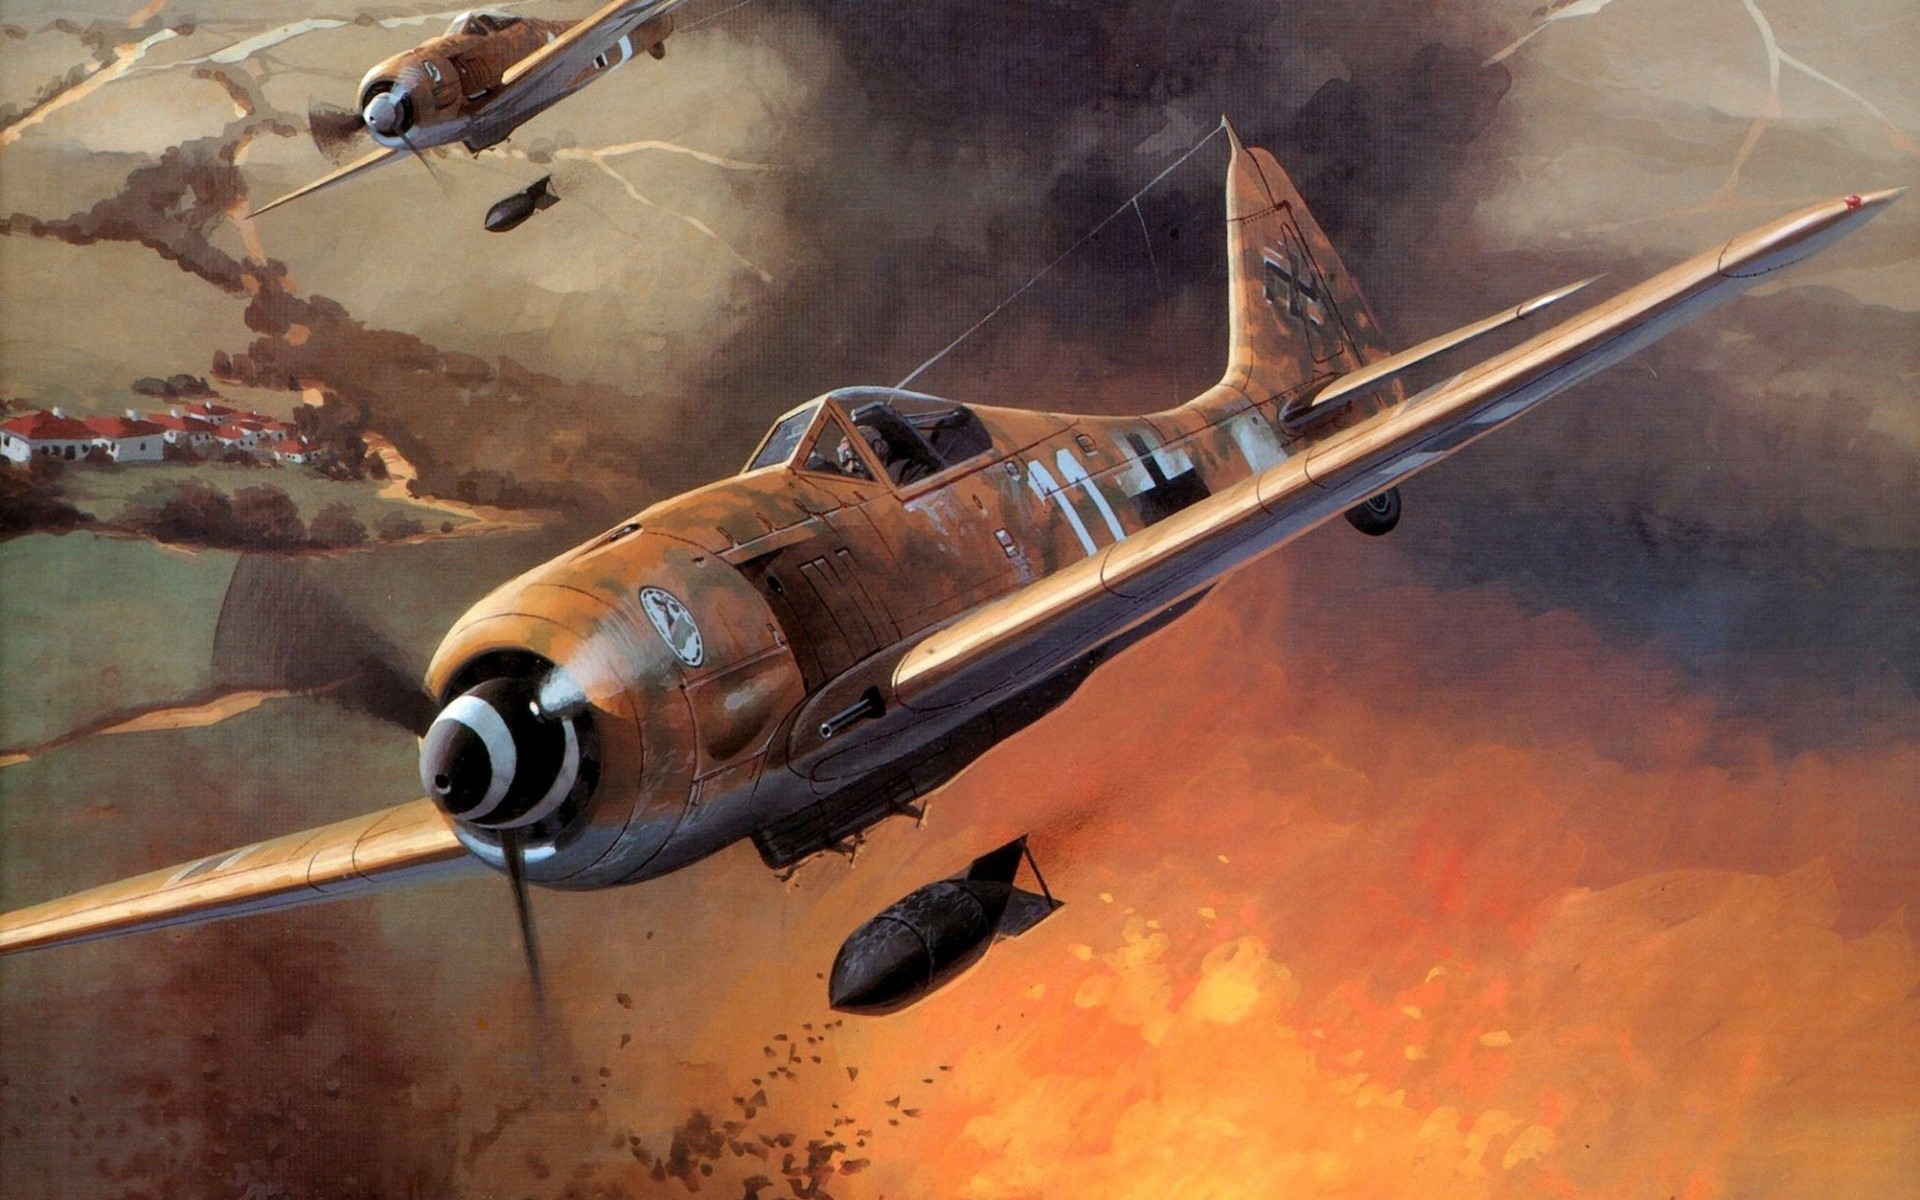 Military aircraft flight exquisite painting wallpapers #6 - 1920x1200